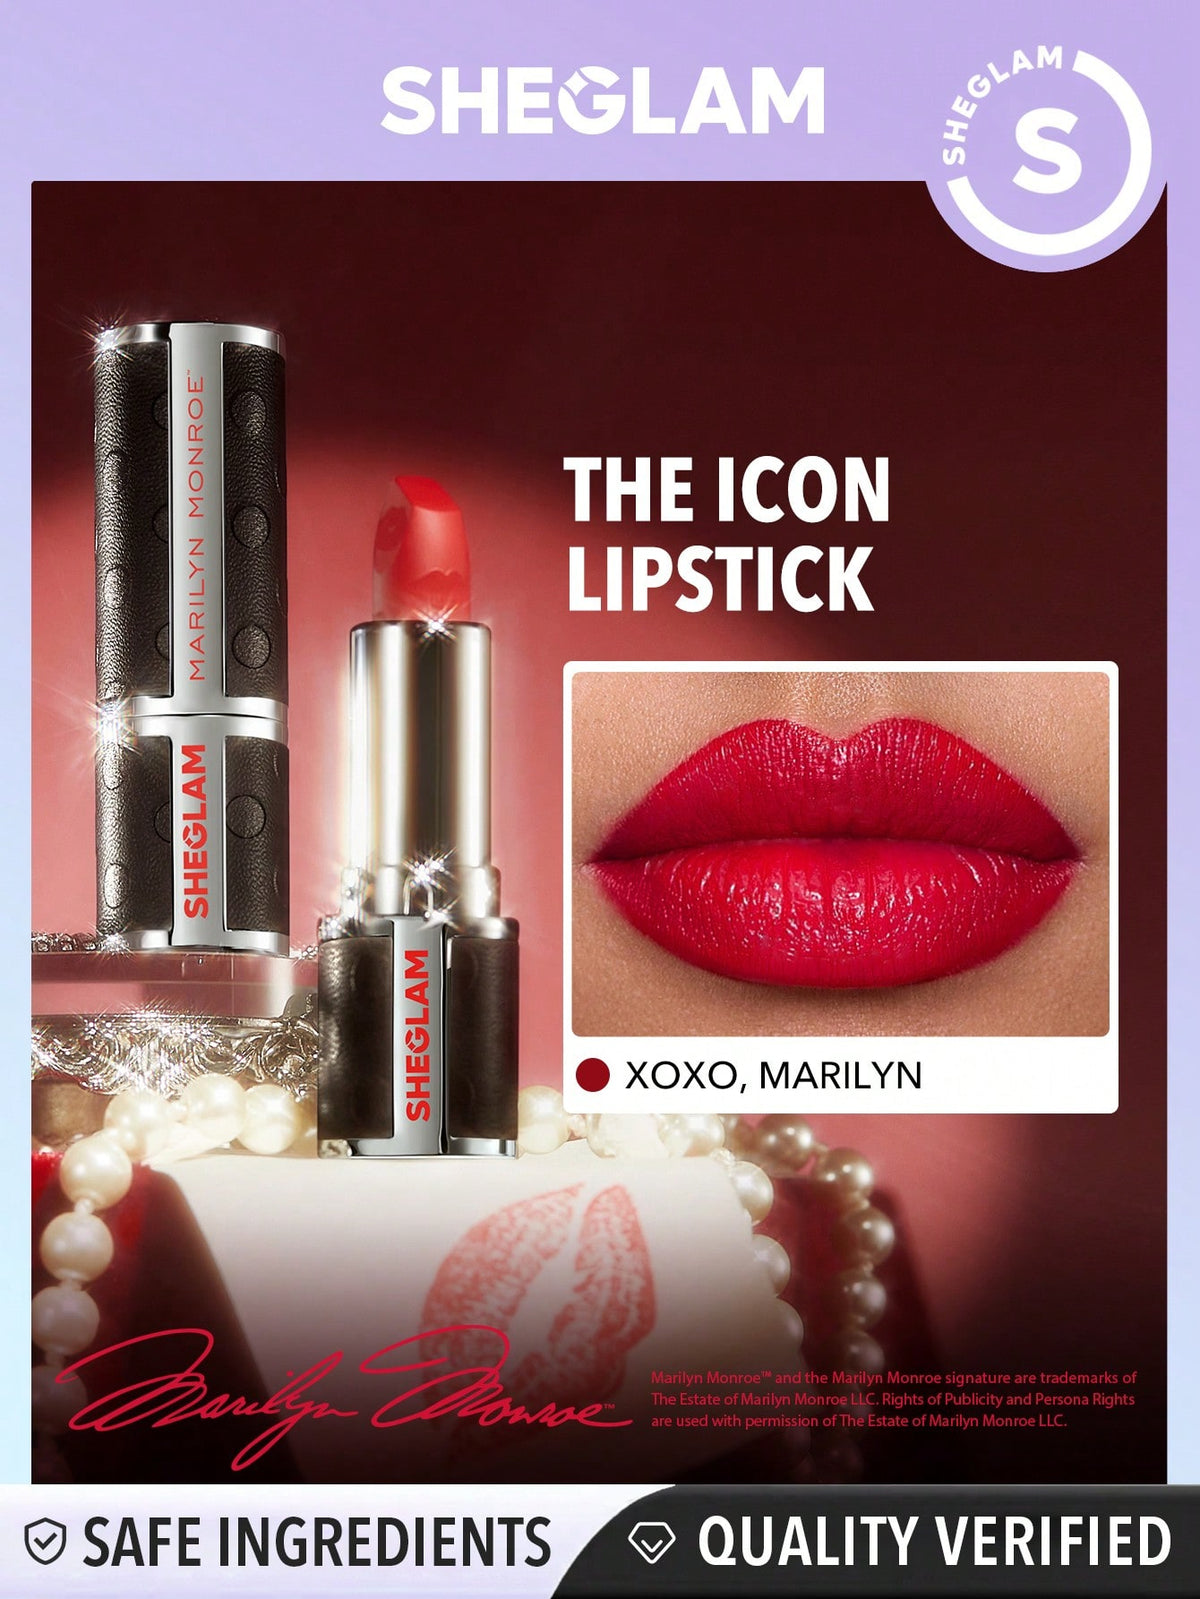 Marilyn Monroe X SHEGLAM The Icon Lipstick-Xoxo, Marilyn Valentines Gift Red Lipstick Long Lasting Super Stay High Pigment Lip Balm Lip Makeup